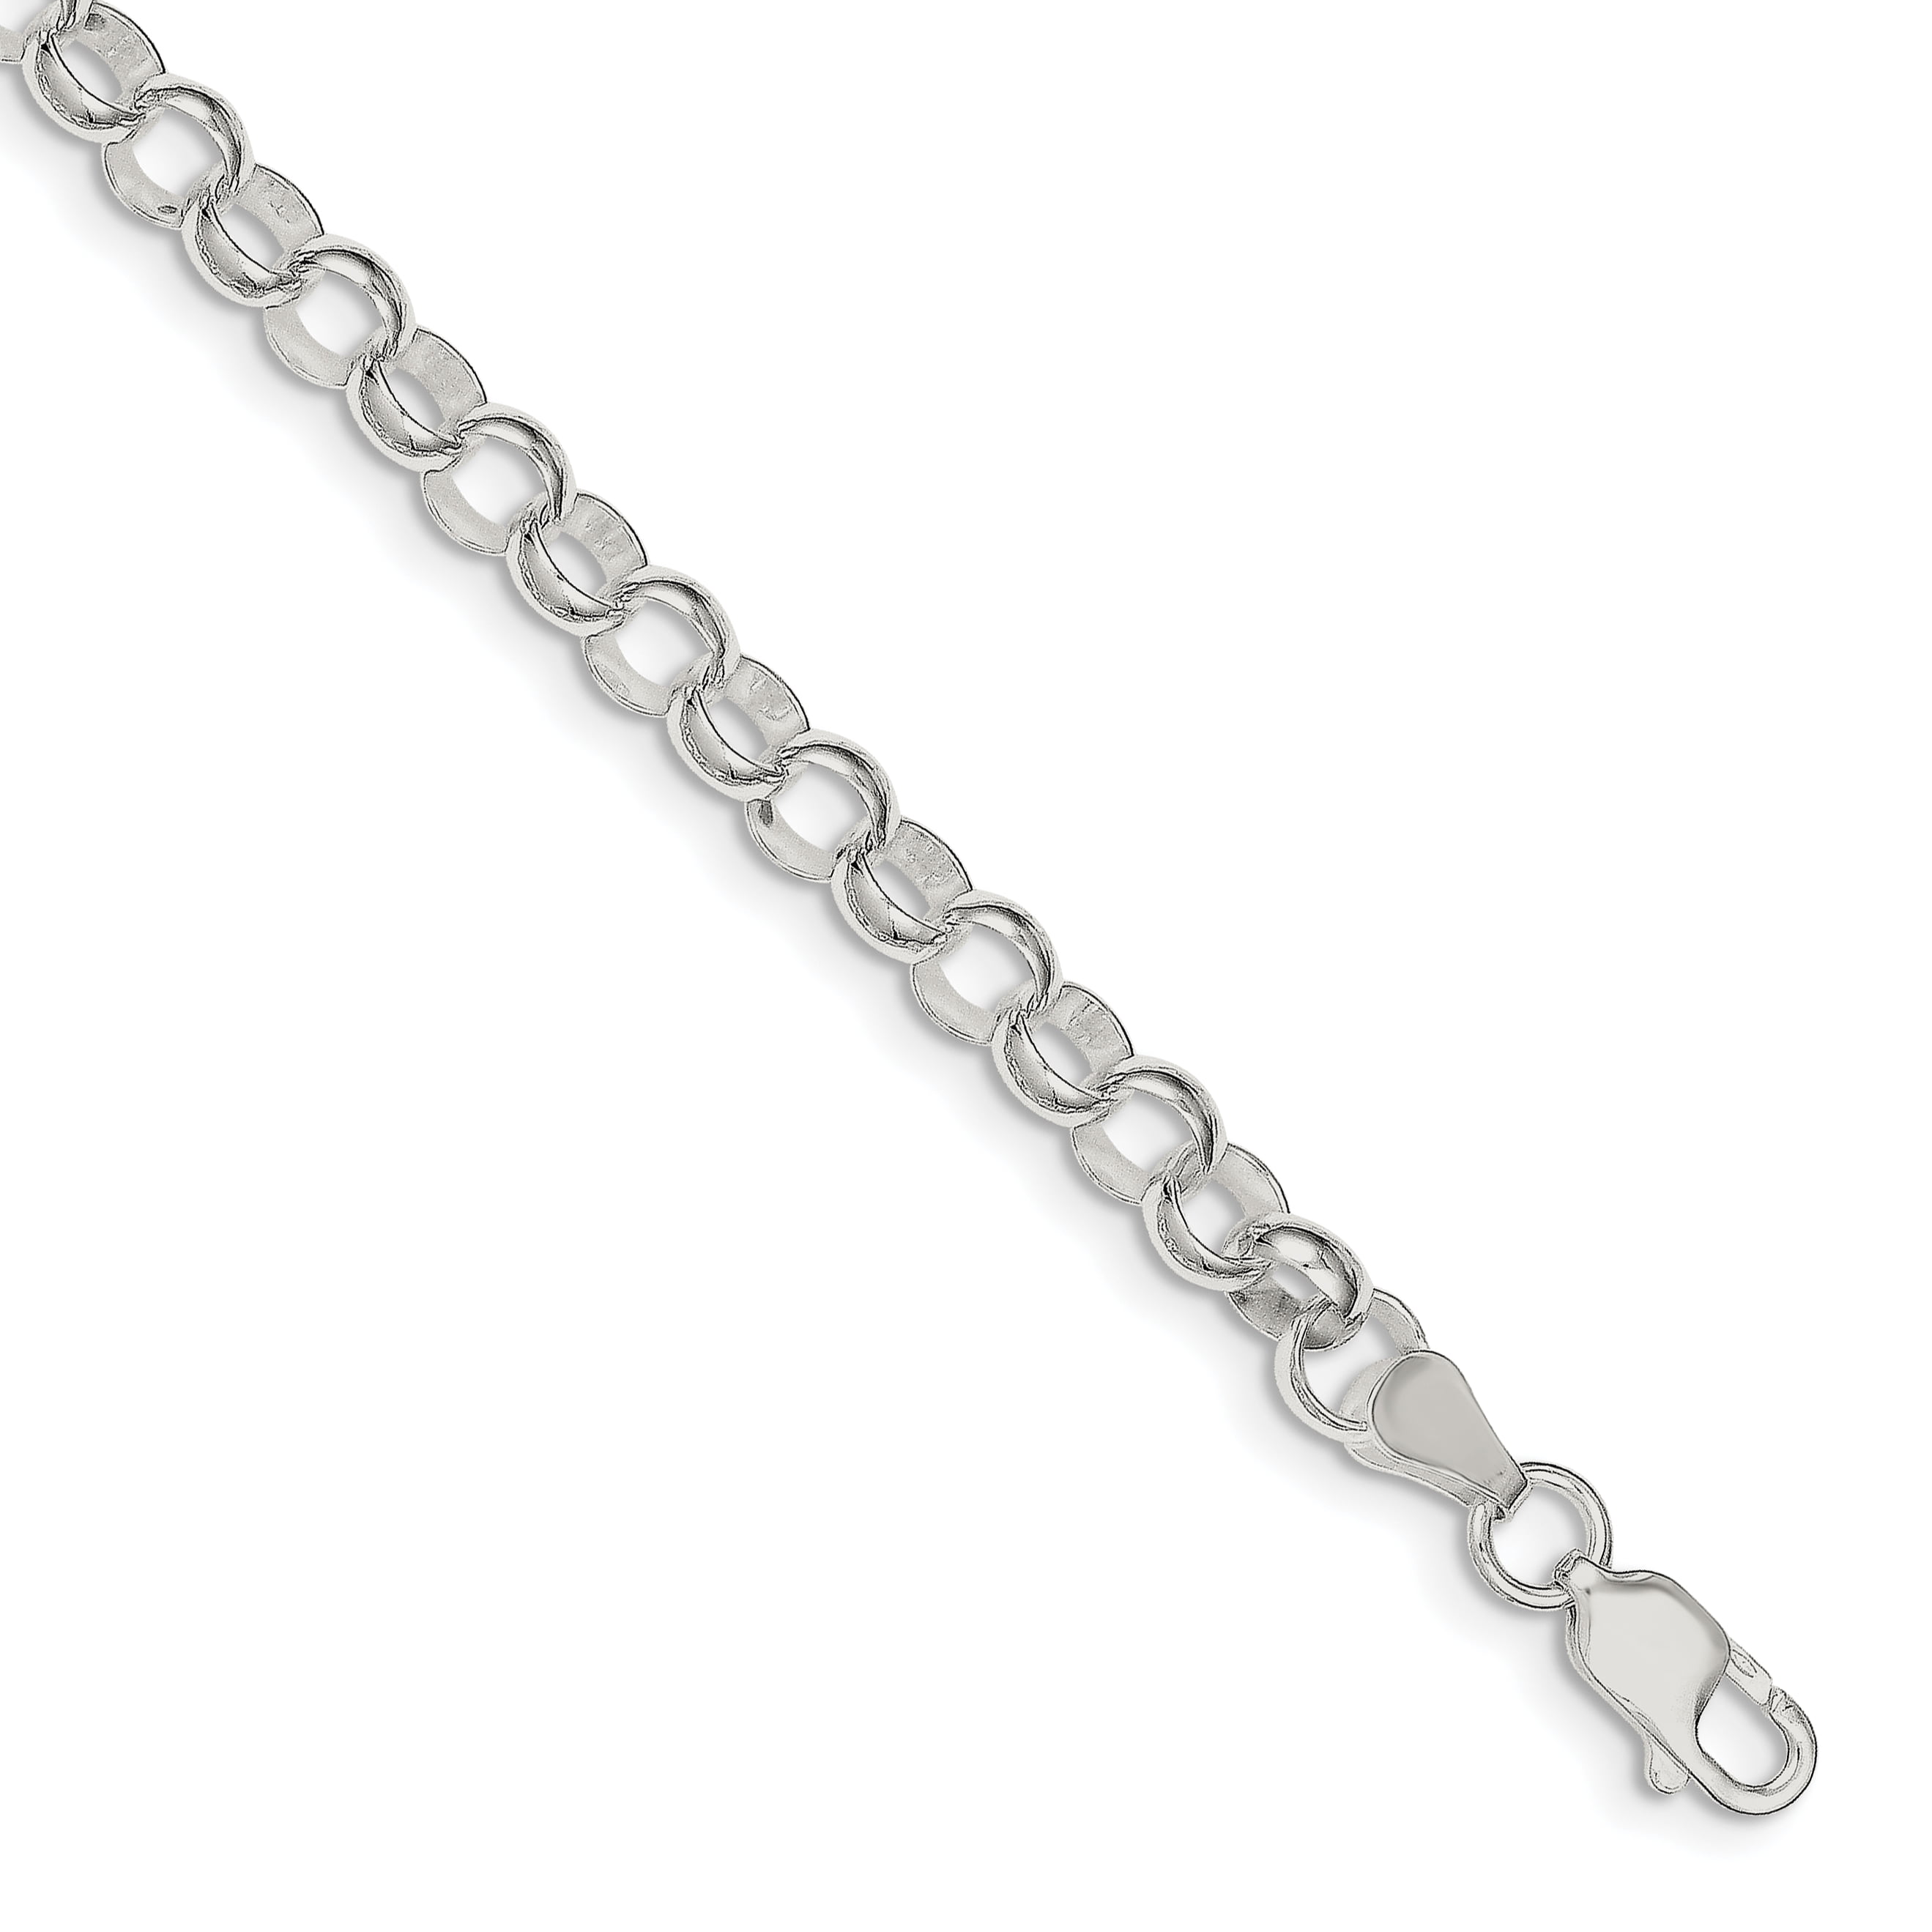 925 Sterling Silver 2" or 3" Inch Belcher Link Safety Chain For Charm Bracelets